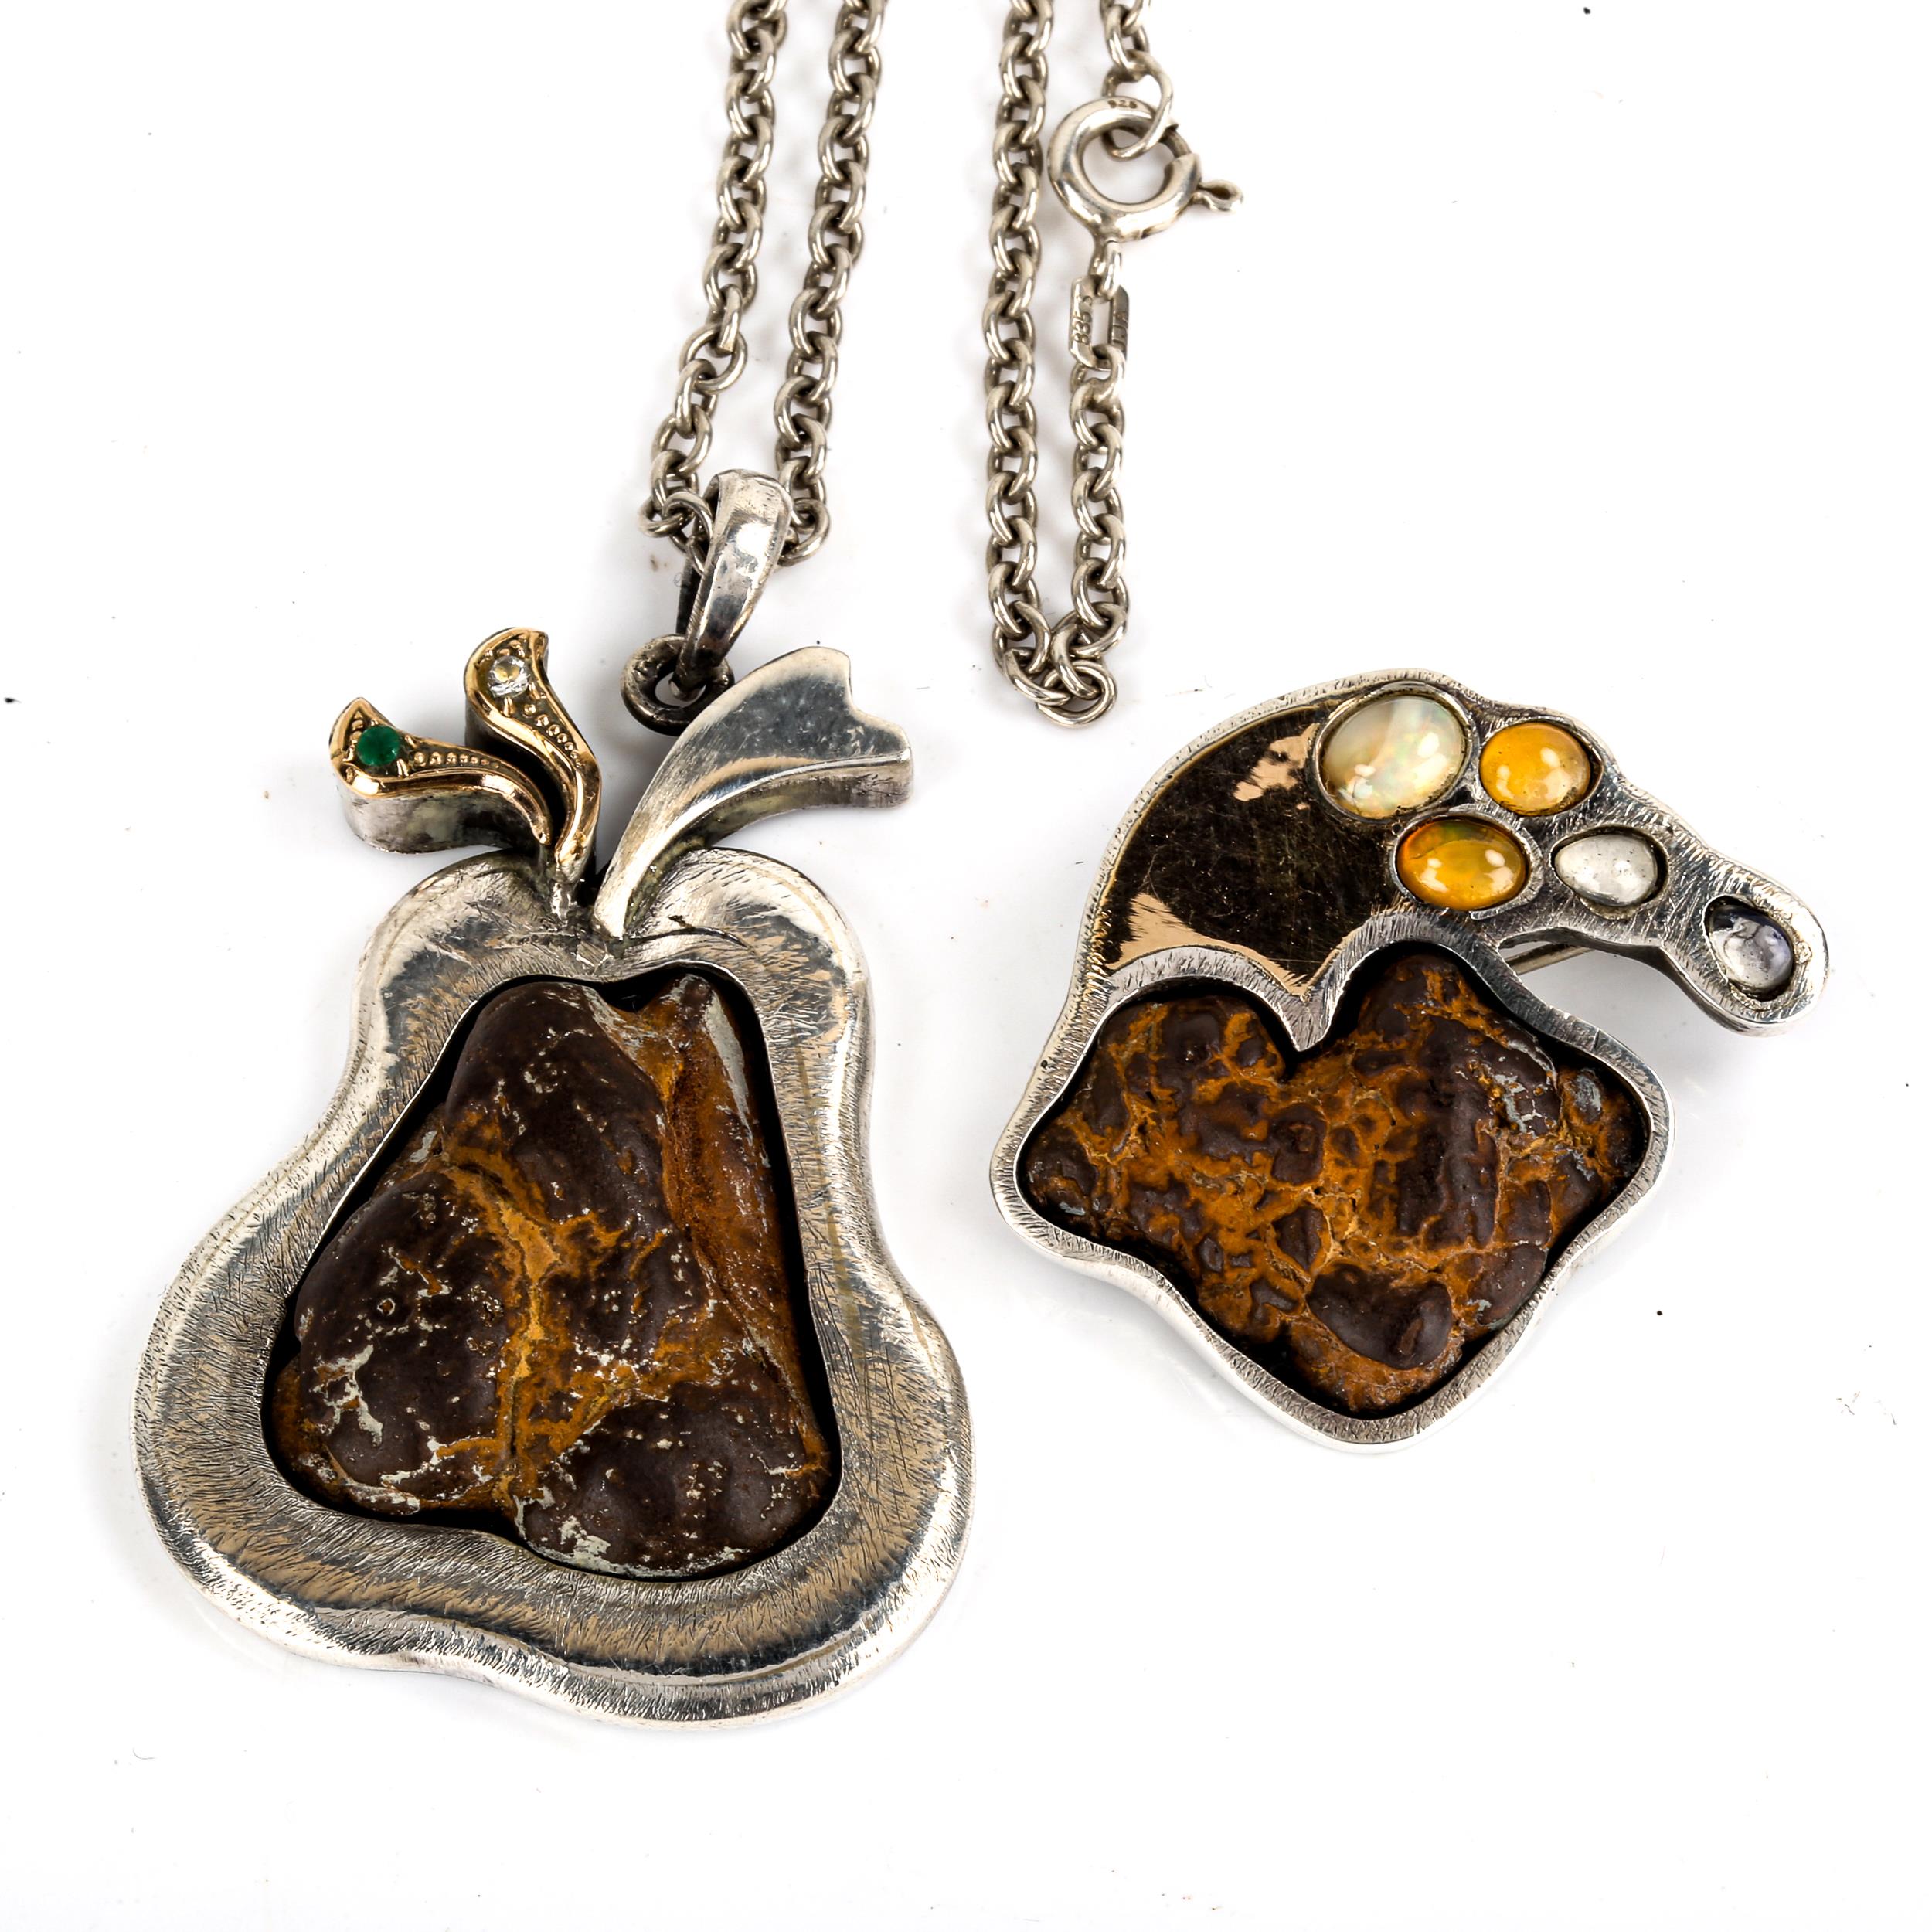 2 pieces of silver-mounted coprolite (fossilised dinosaur faeces) jewellery, comprising pendant